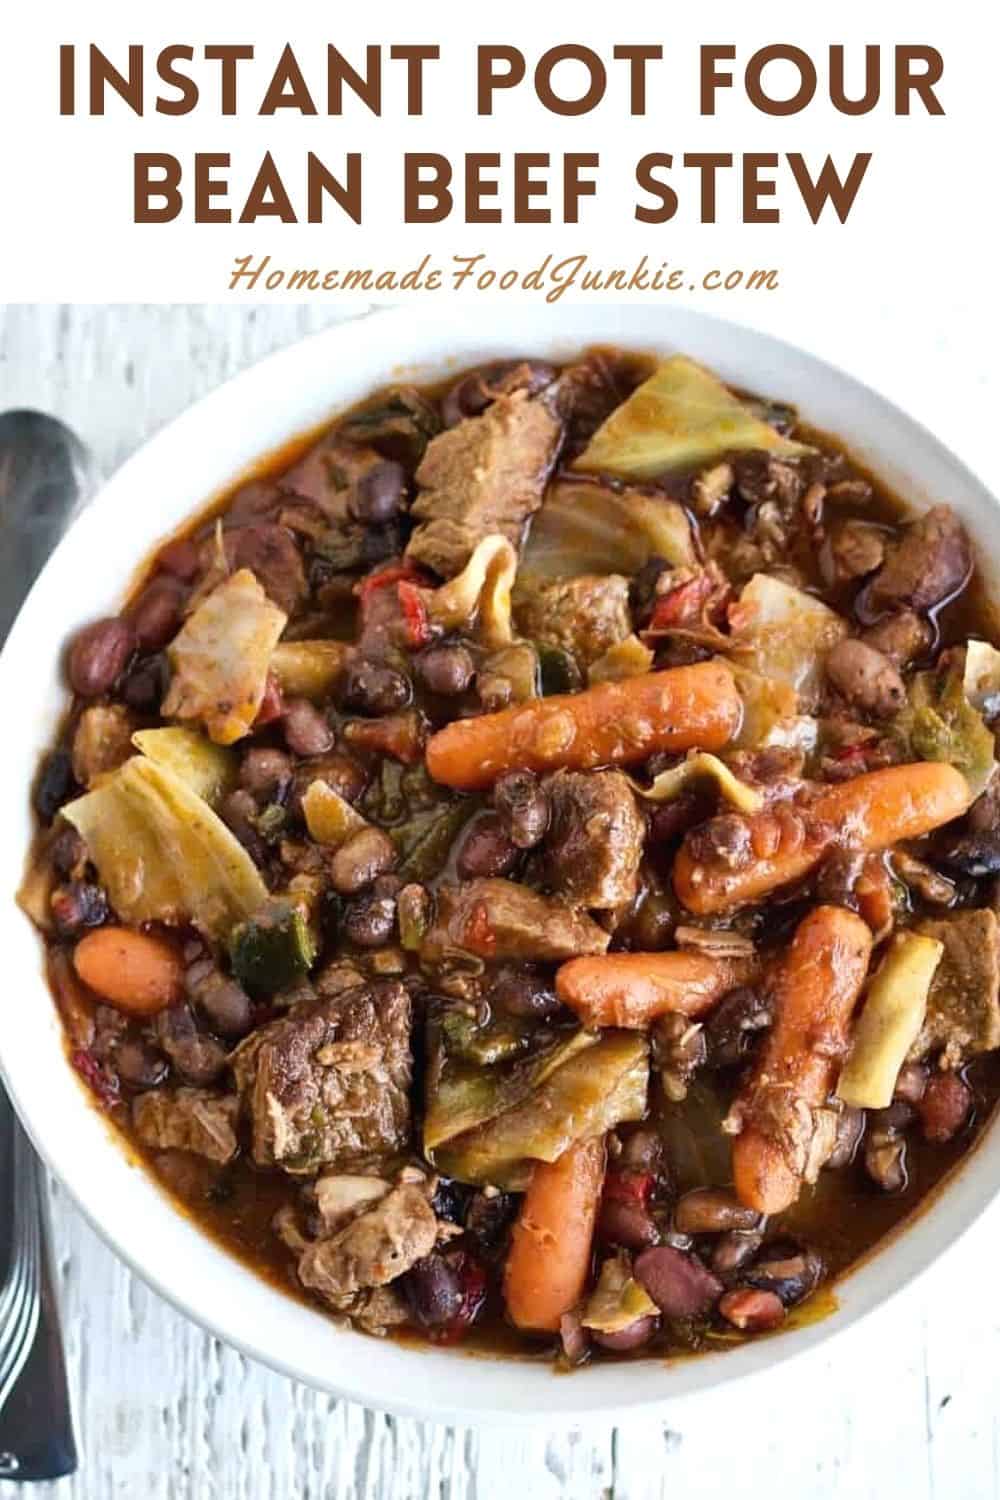 Instant Pot Four Bean Beef Stew-Pin Image